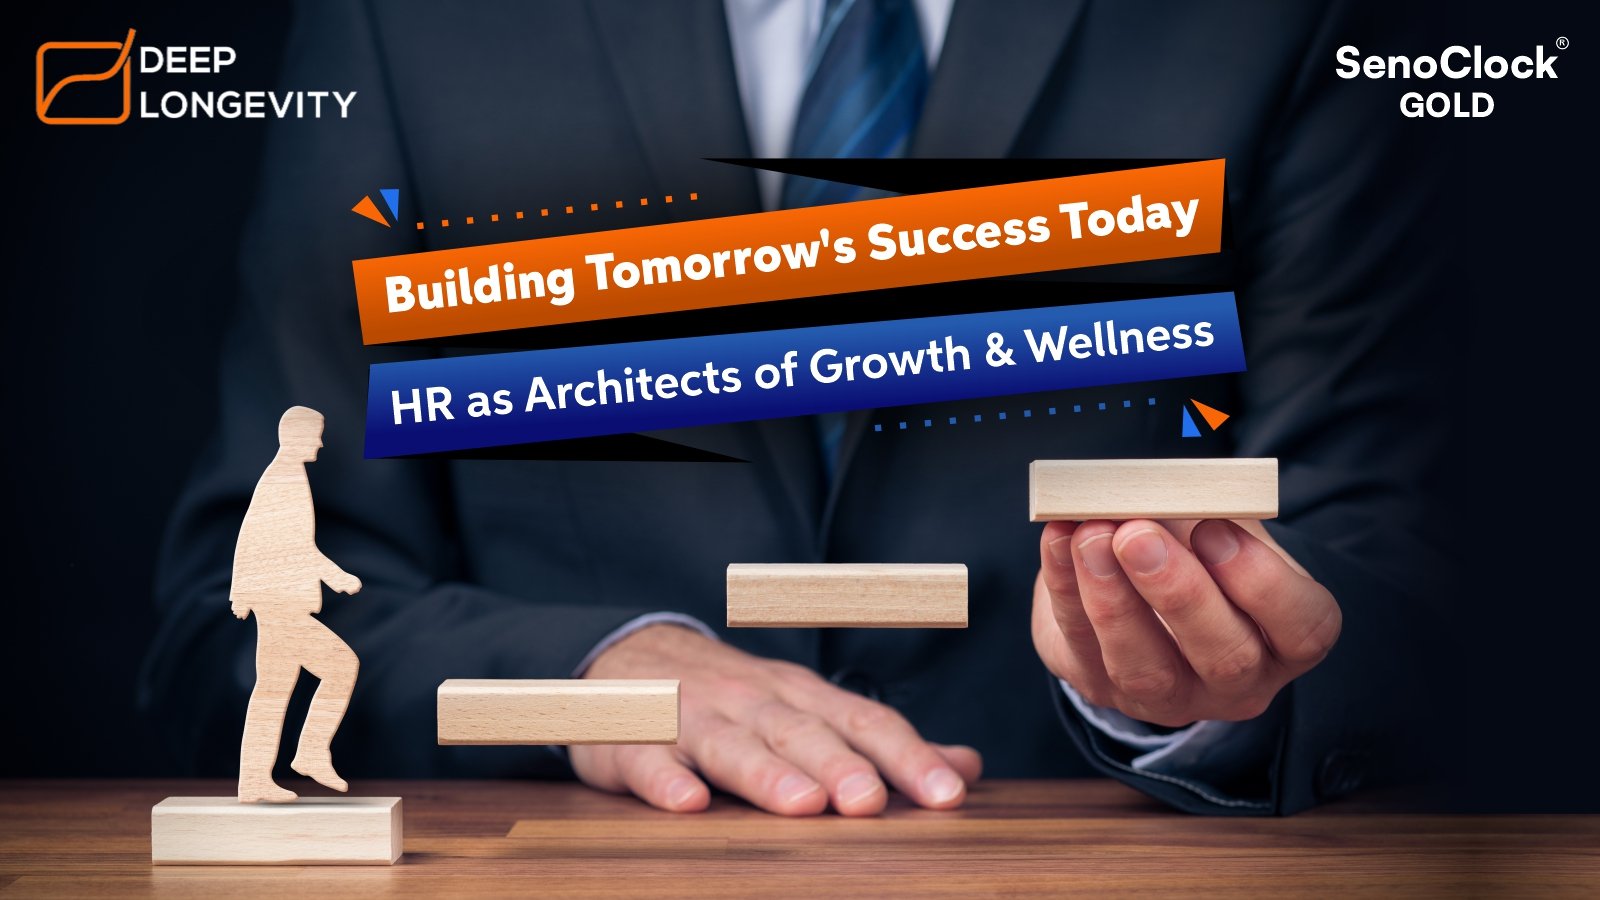 SenoClock Gold: Empowering HR as Architects of Growth and Wellness